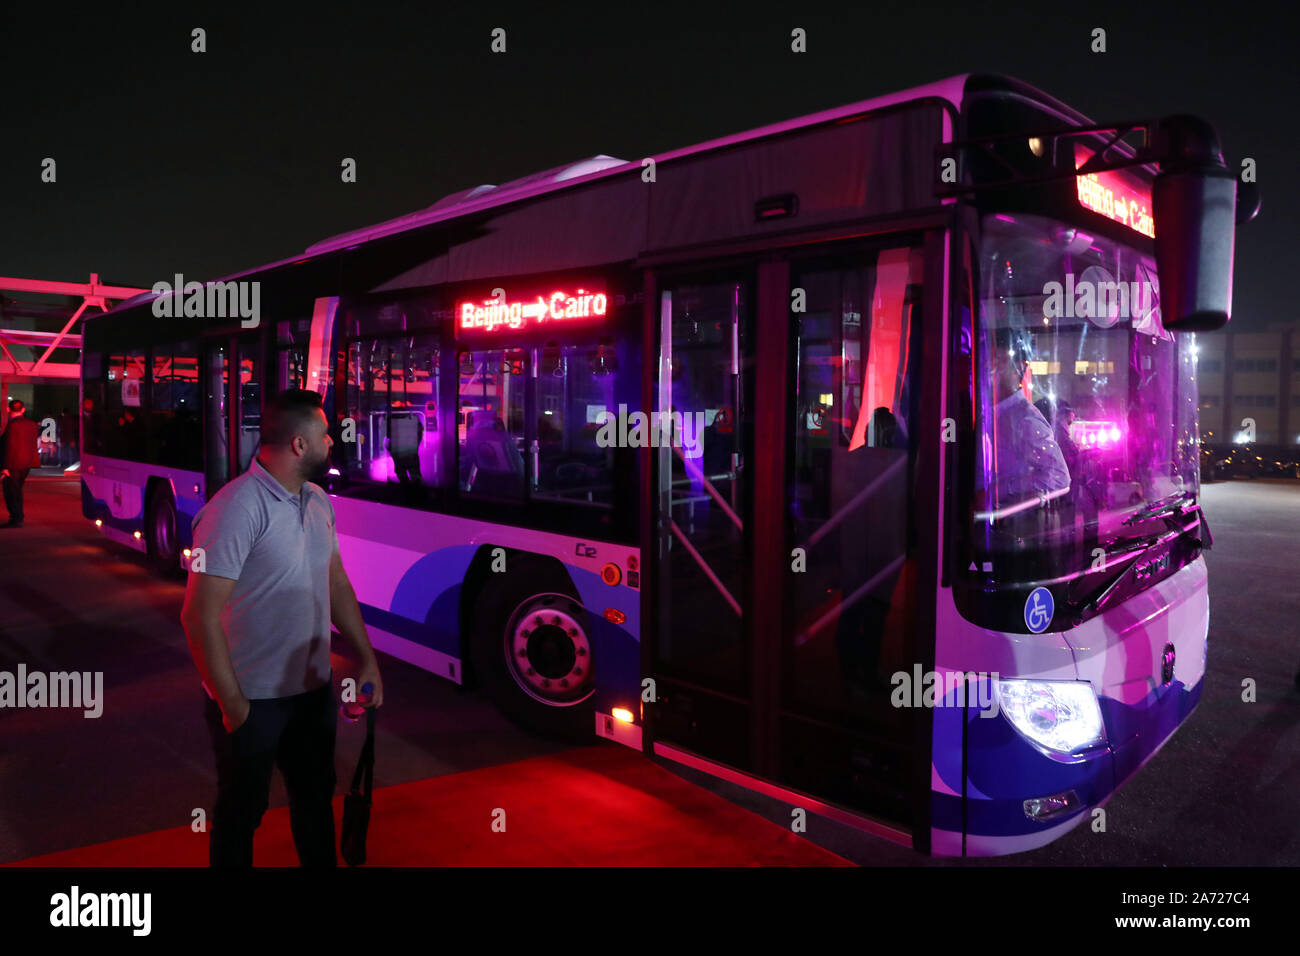 (191029) -- SALAM CITY (EGYPT), Oct. 29, 2019 (Xinhua) -- A Foton electric bus is seen in Salam City, east of Cairo, capital of Egypt, on Oct. 29, 2019. Egypt's Ministry of Military Production and China's vehicle manufacturer Foton Motor celebrated on Tuesday the launch of a new project for jointly manufacturing electric buses in Egypt. During a ceremony in Salam City, both sides also celebrated the delivery of Foton's first batch of two electric buses for Egypt. (Xinhua/Ahmed Gomaa) Stock Photo